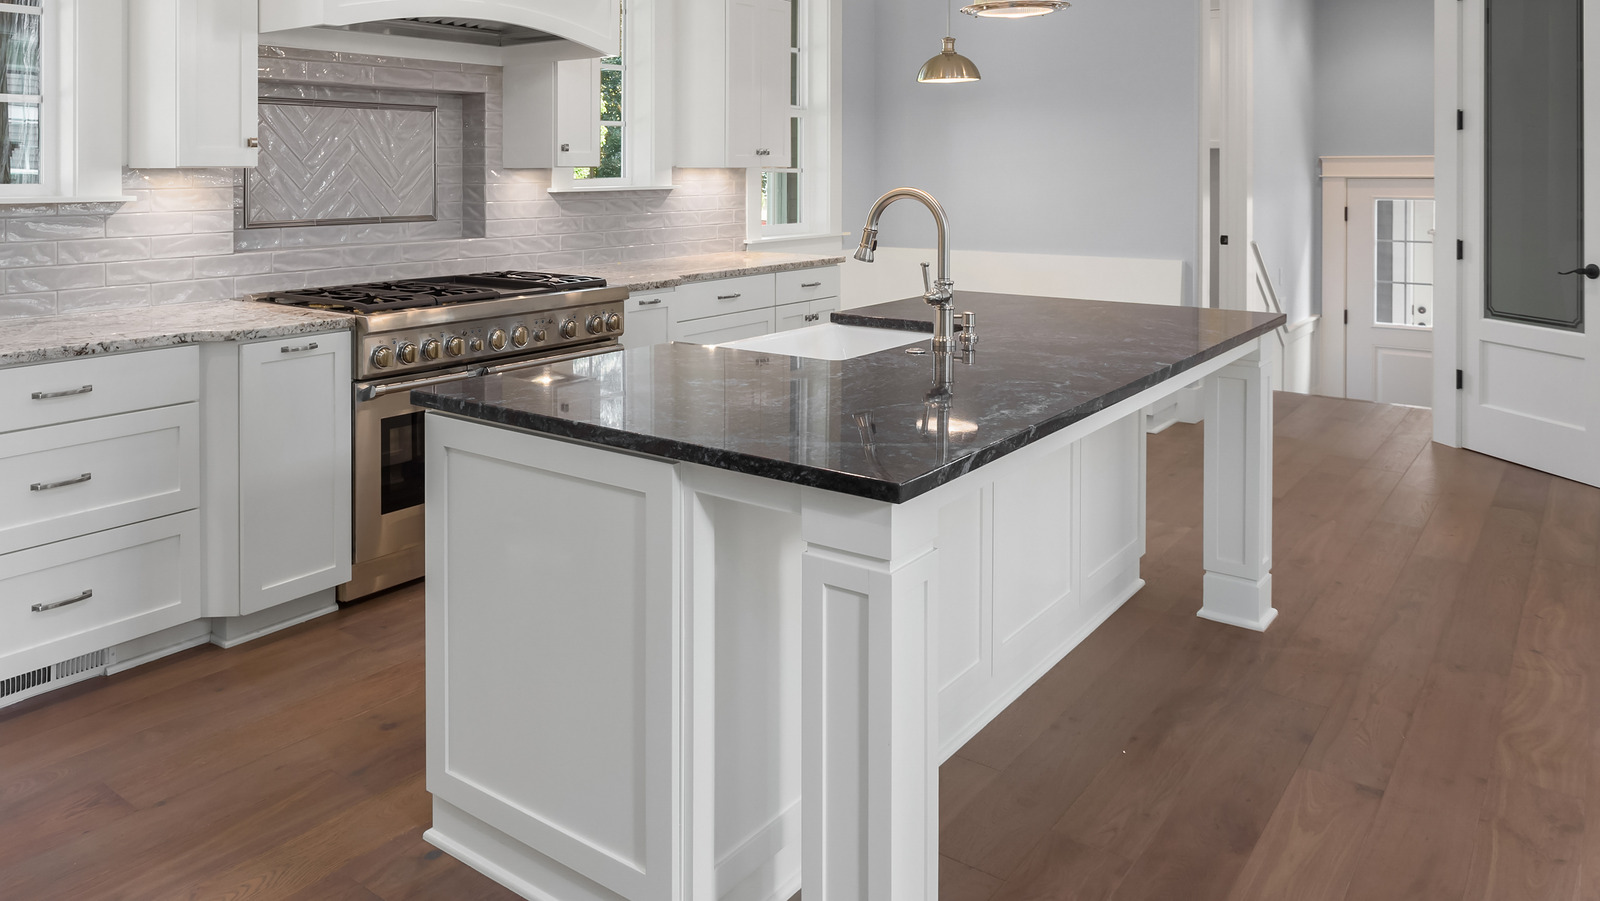 https://www.housedigest.com/img/gallery/15-types-of-kitchen-islands-that-will-transform-your-home/l-intro-1635173422.jpg